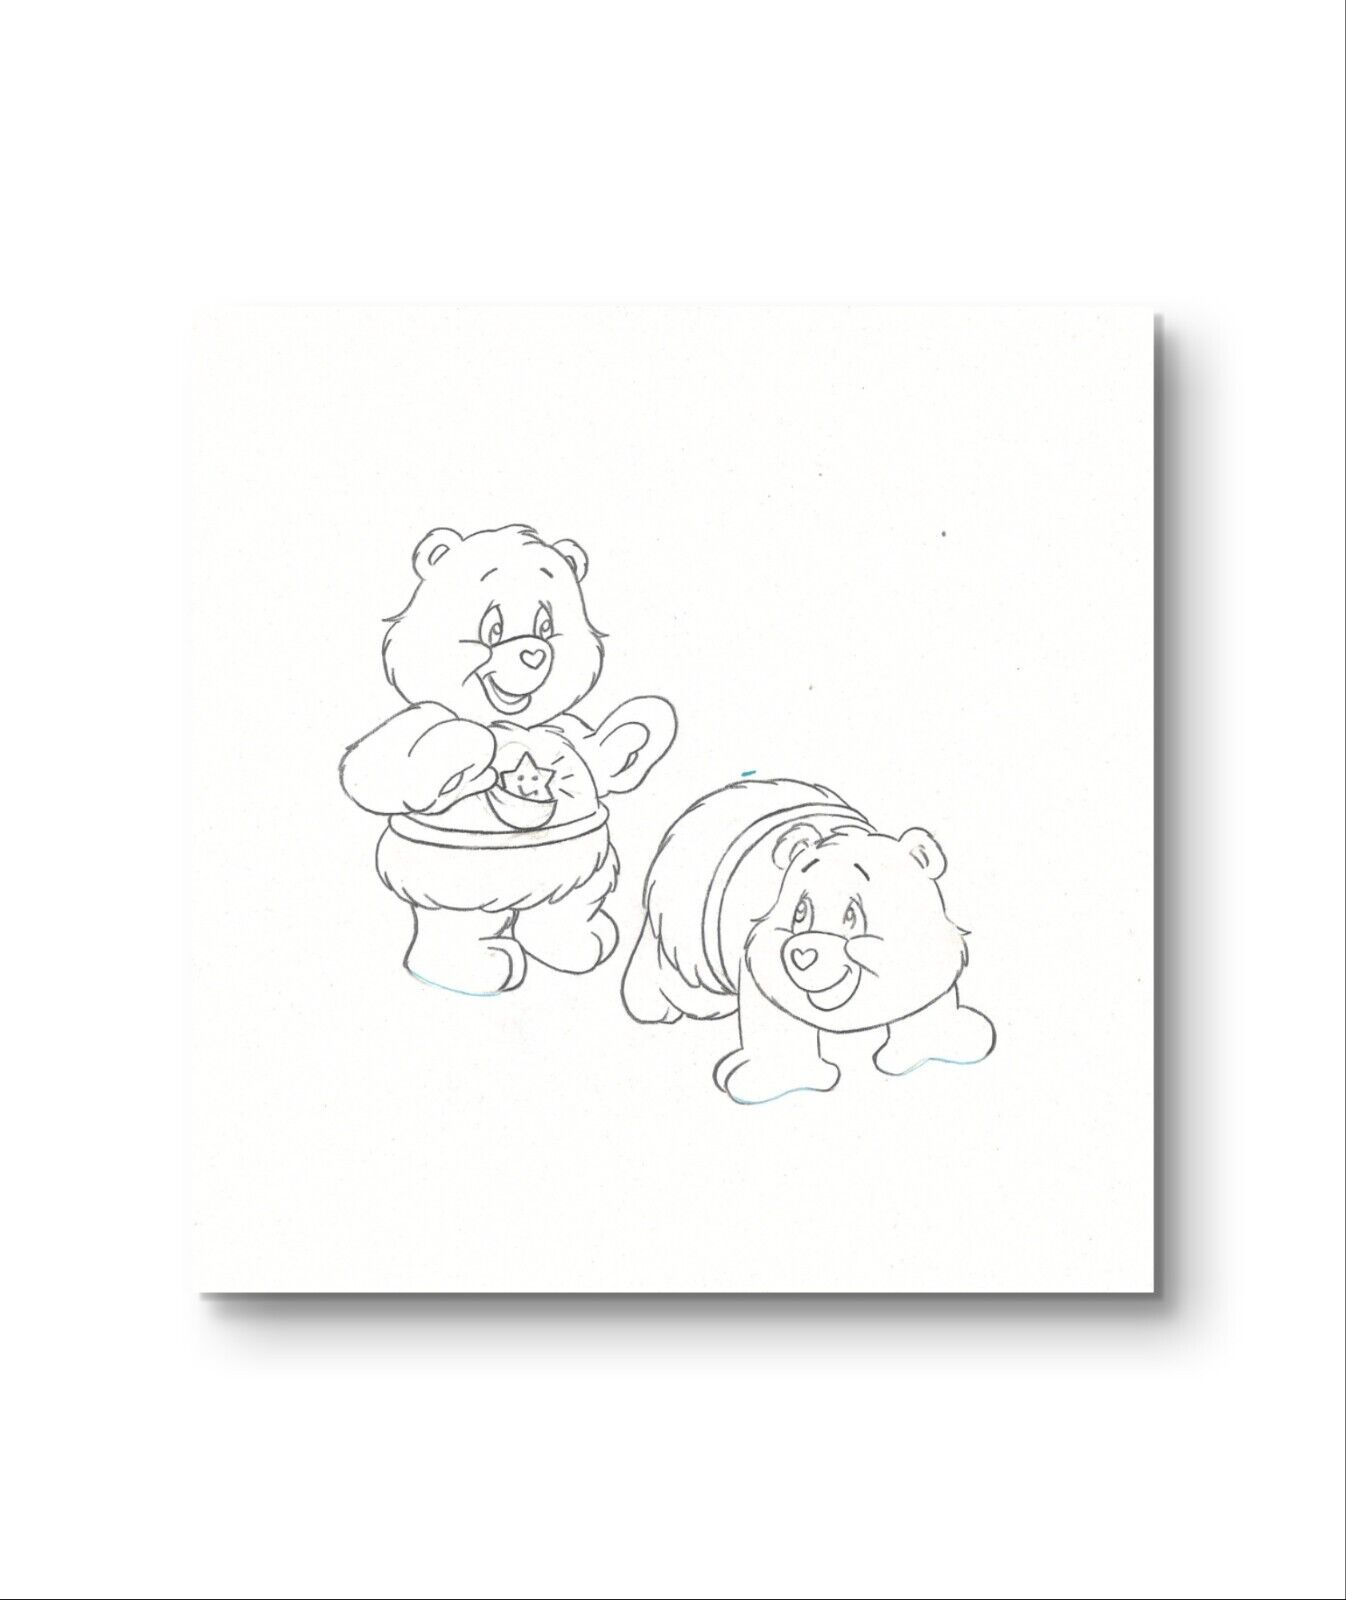 Care Bears Classic Series Animation Drawing, 1988: Baby Tugs and Baby Hugs Bear